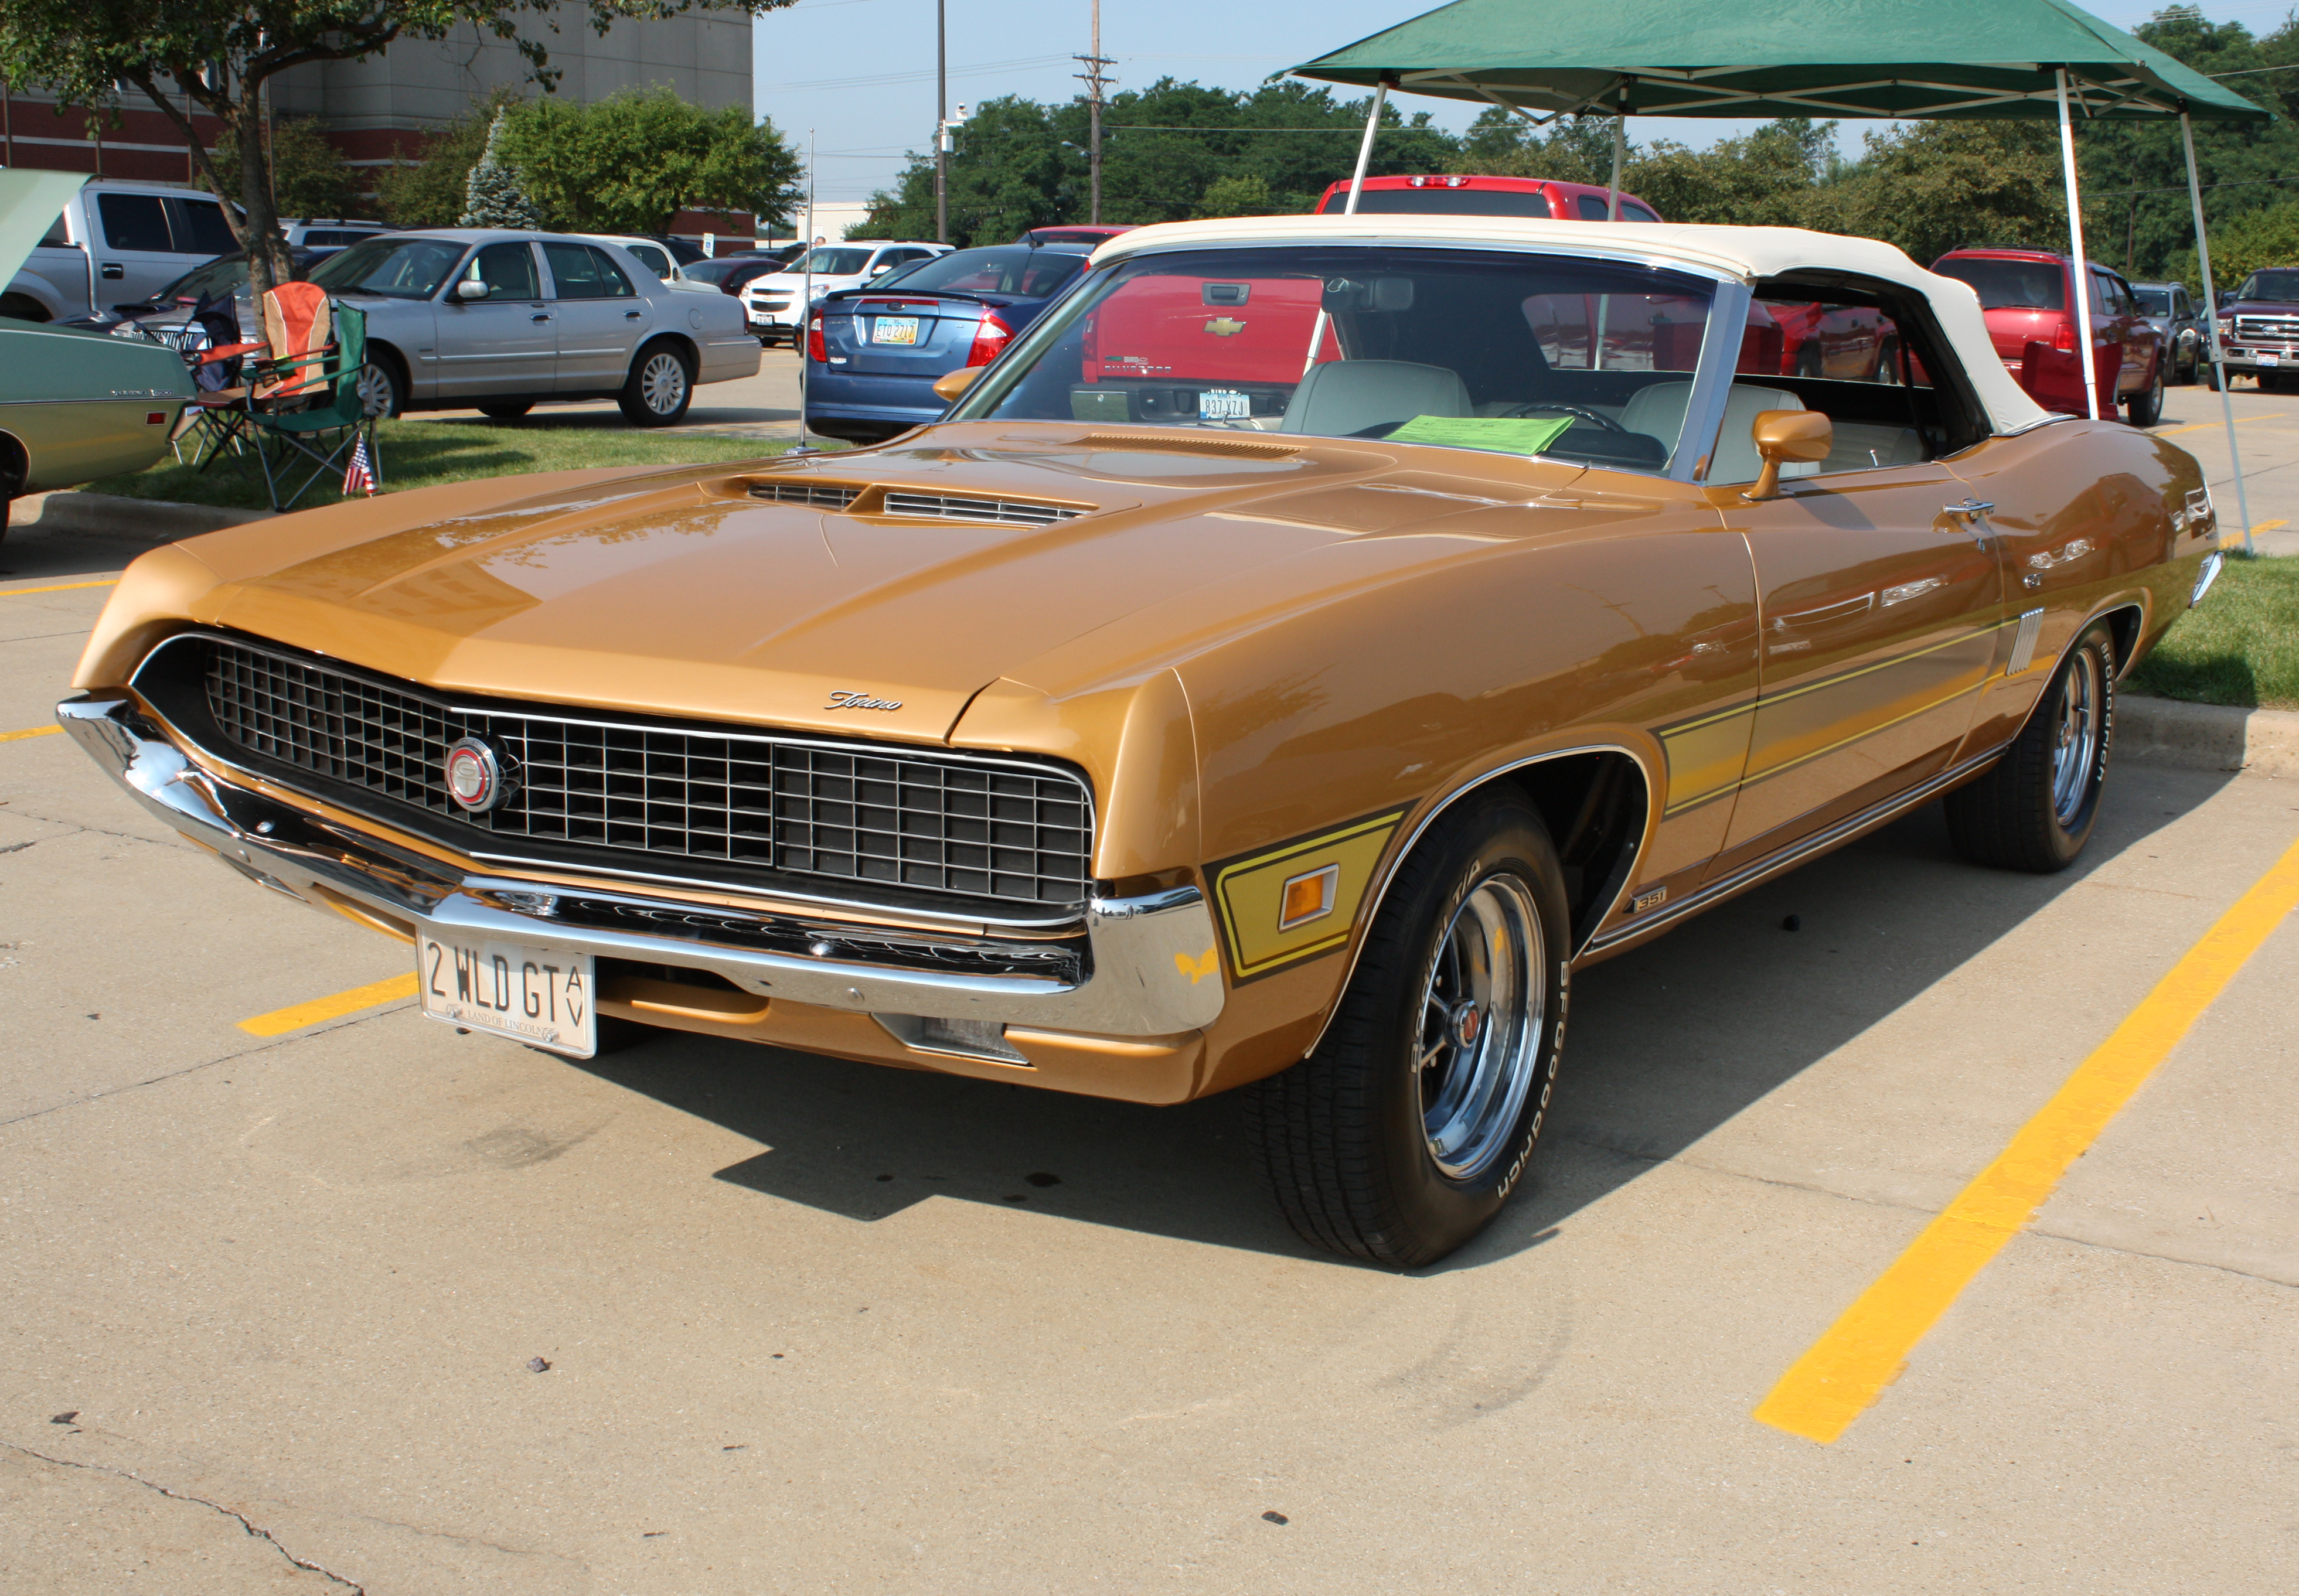 Vehicles Ford Torino HD Wallpaper | Background Image